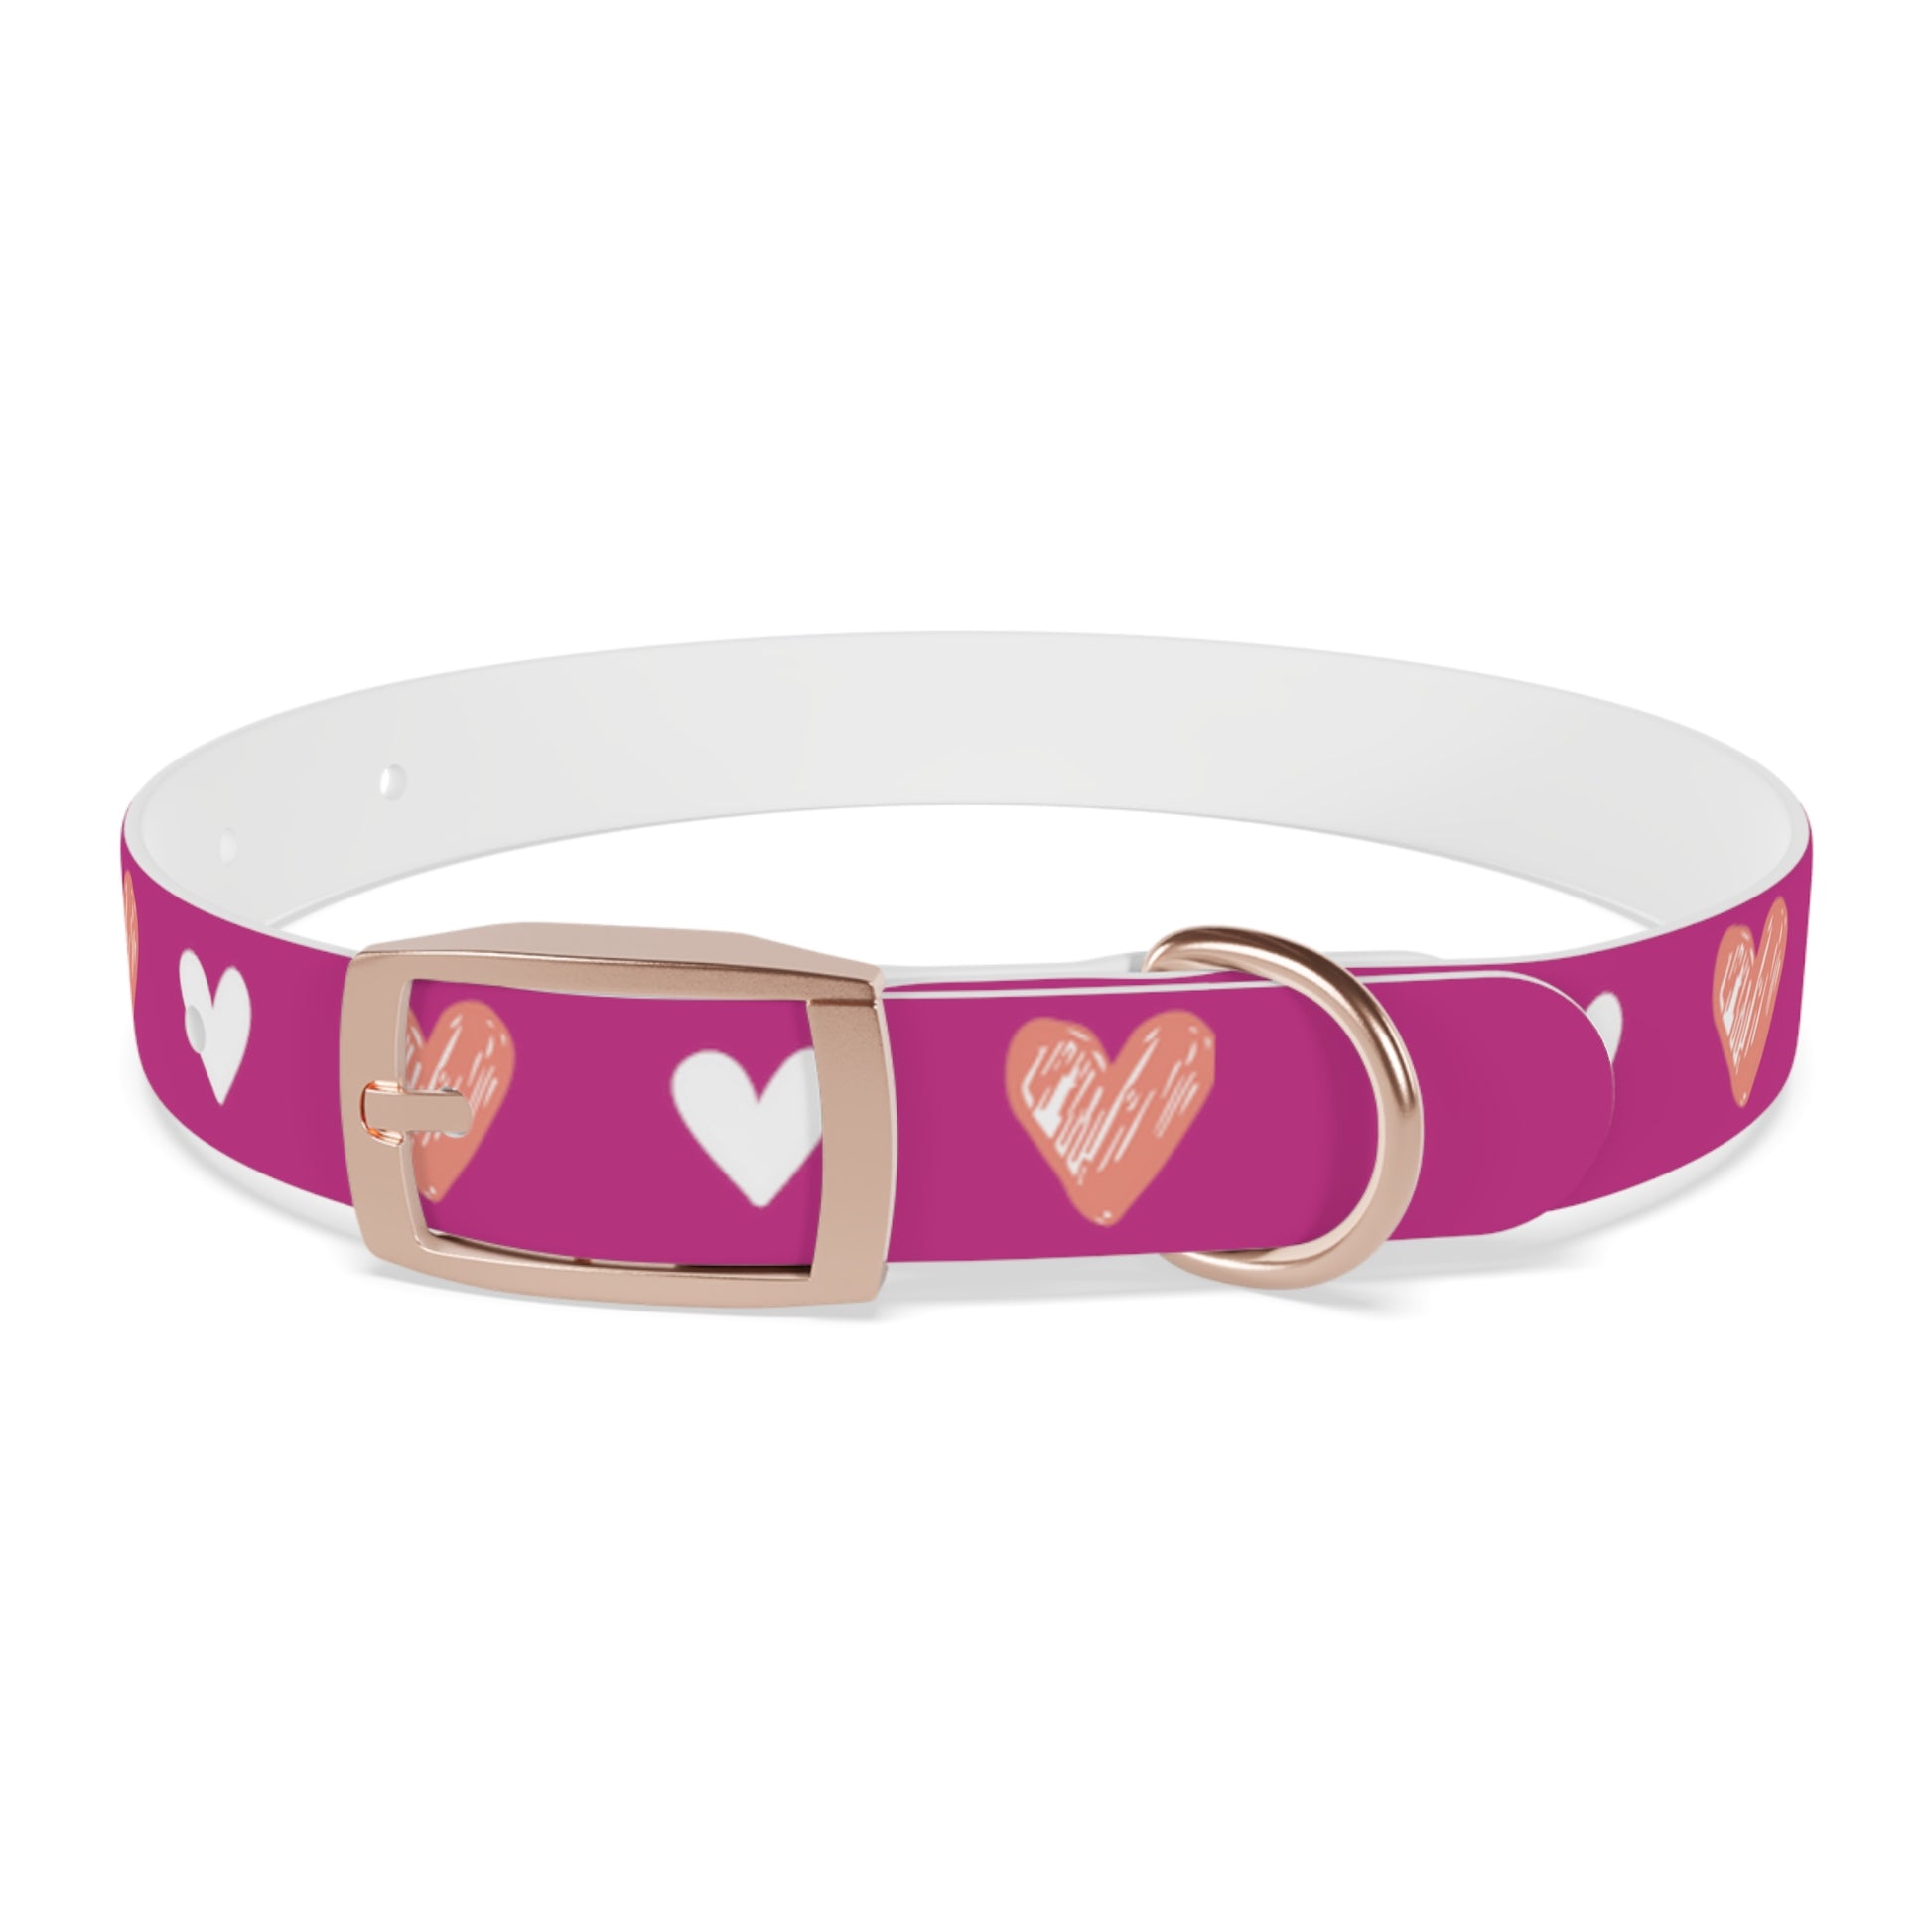 a dog collar with a beautiful hearts pattern design. The color of the dog collar is pink